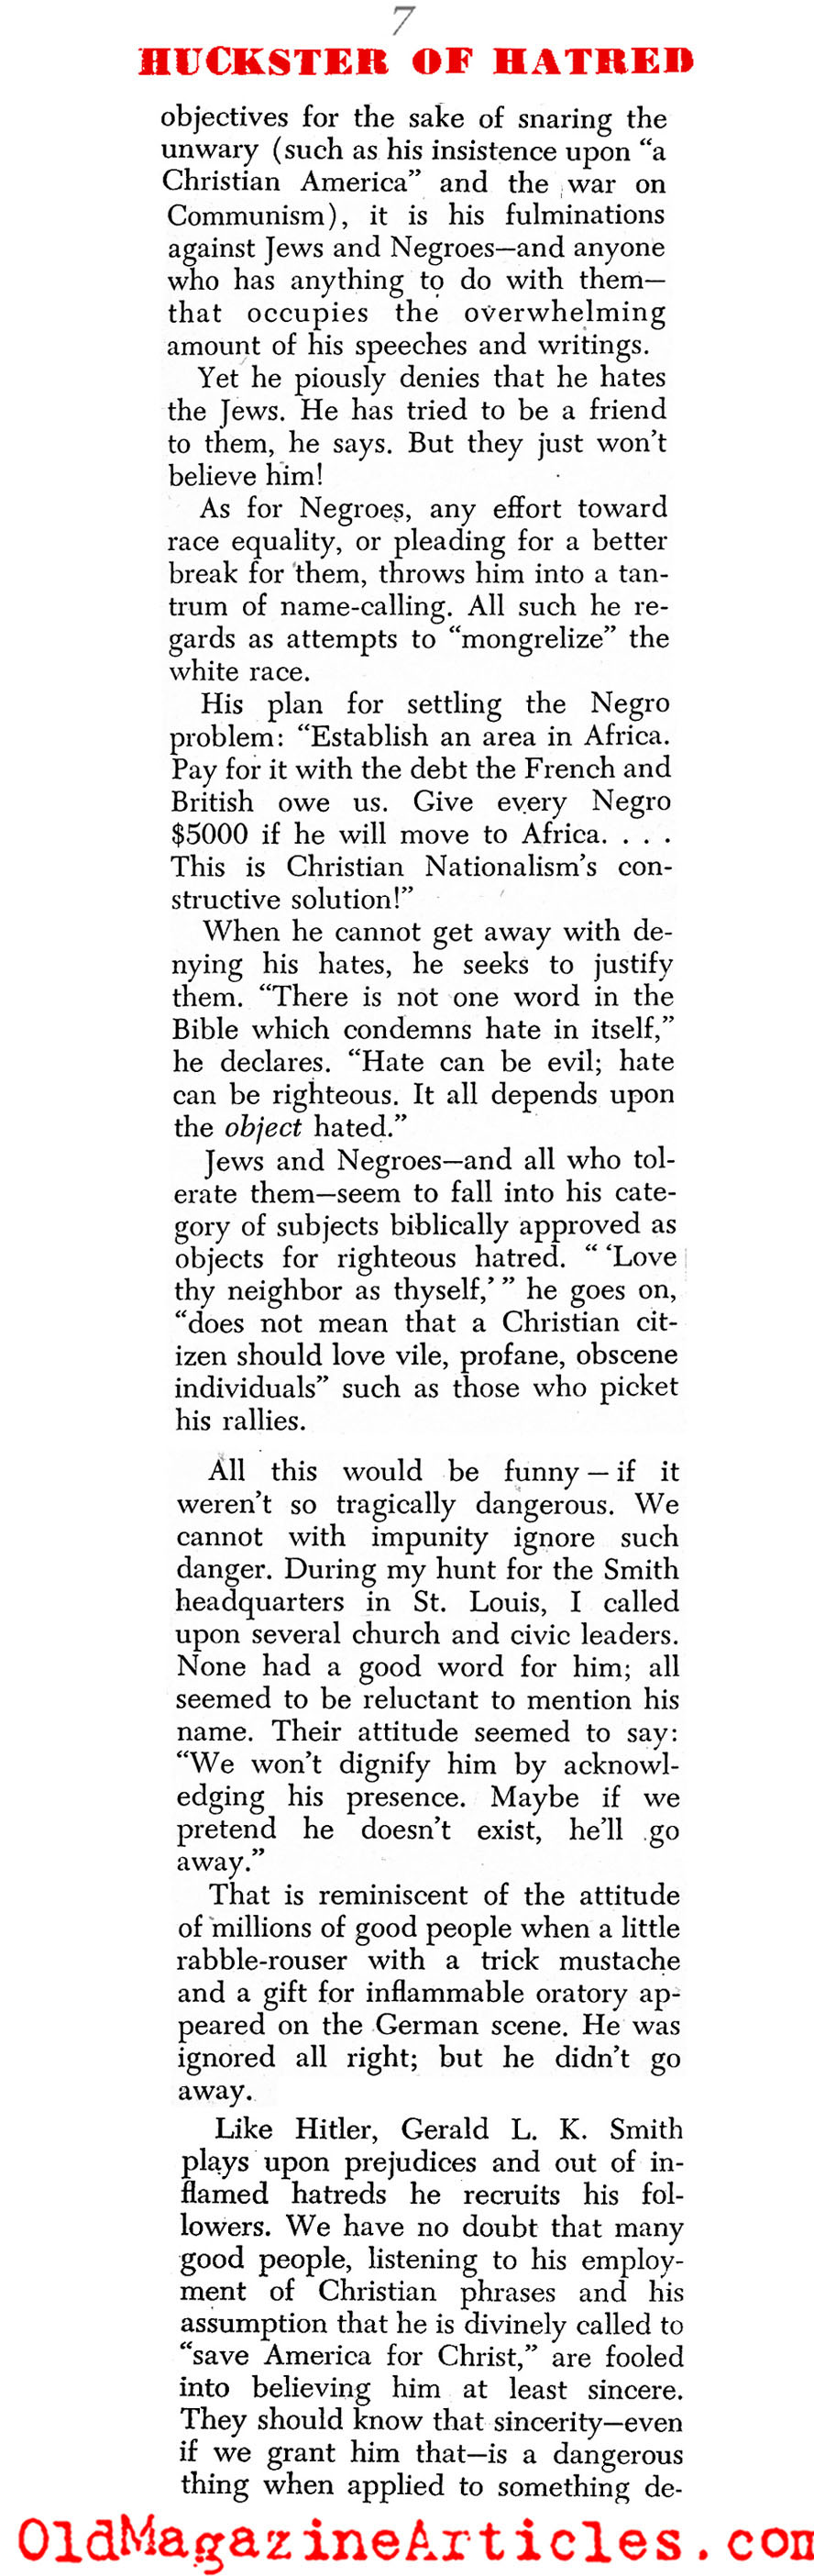 Christian Nationalism: the First Go-Round (Christian Herald Magazine, 1950)